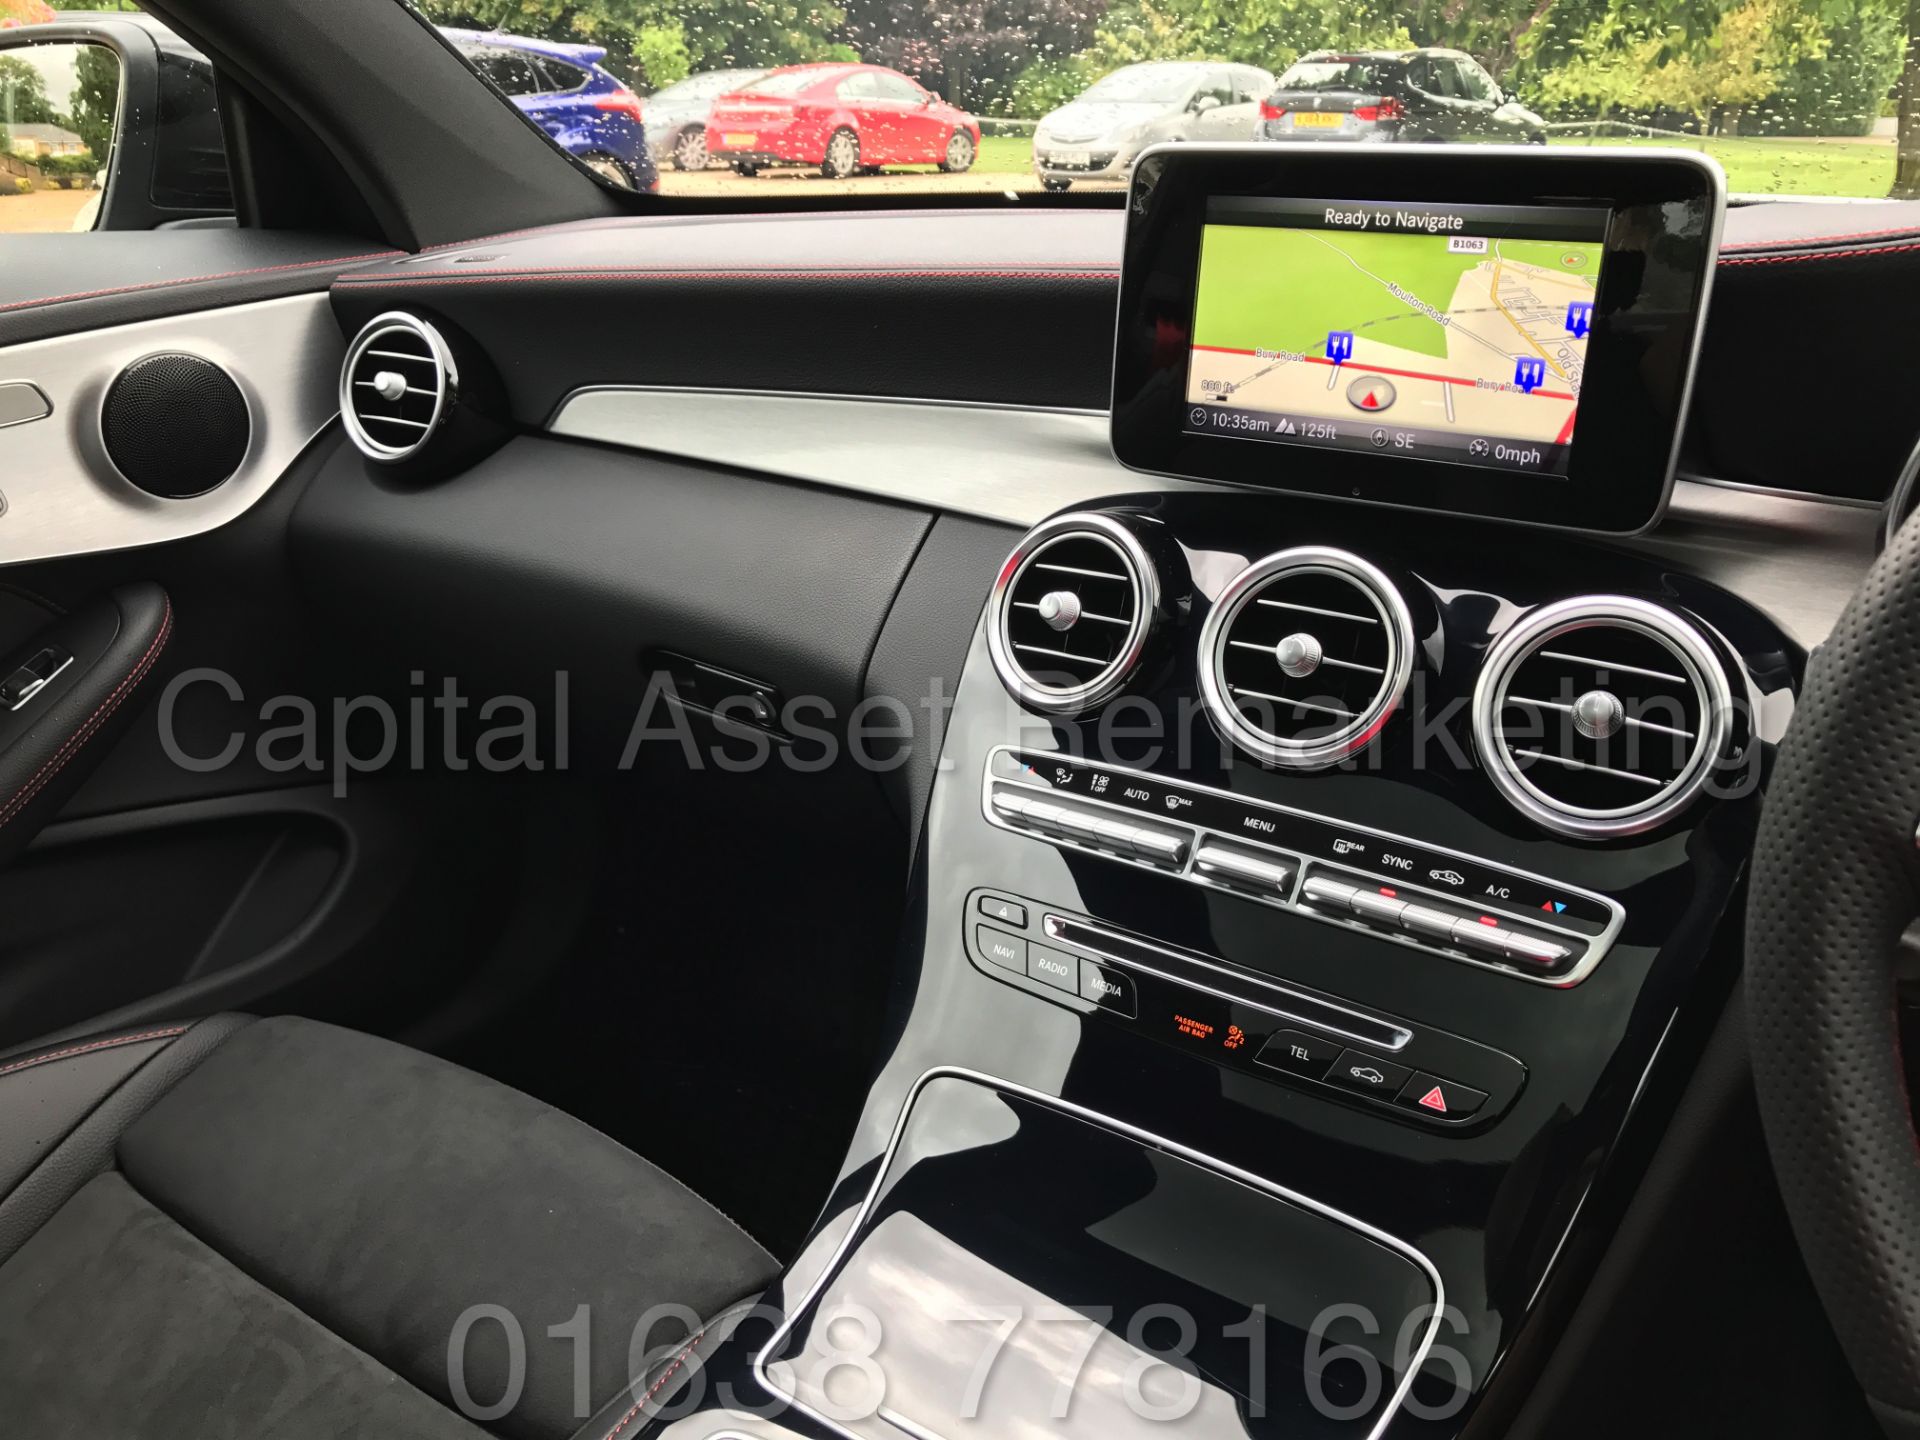 MEREDES-BENZ C43 AMG PREMIUM '4 MATIC' COUPE (2017) '9-G AUTO - LEATHER - SAT NAV' **FULLY LOADED** - Image 40 of 57